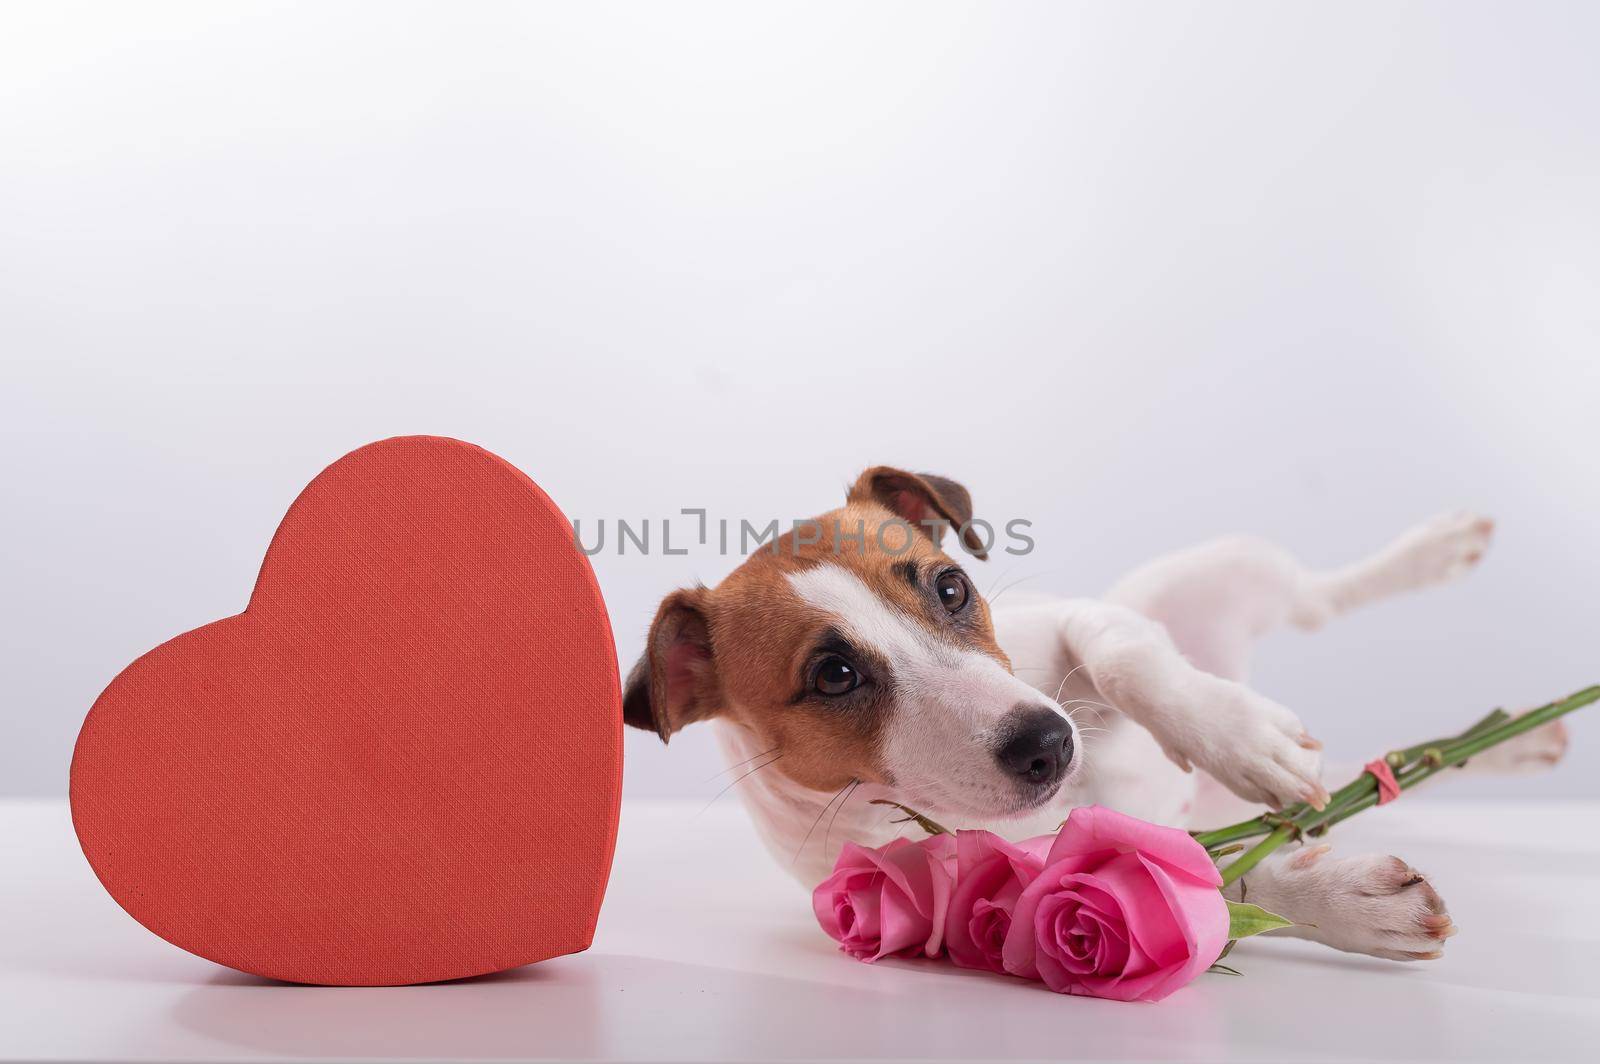 A cute dog lies next to a heart-shaped box and holds a bouquet of pink roses on a white background. Valentine's day gift.